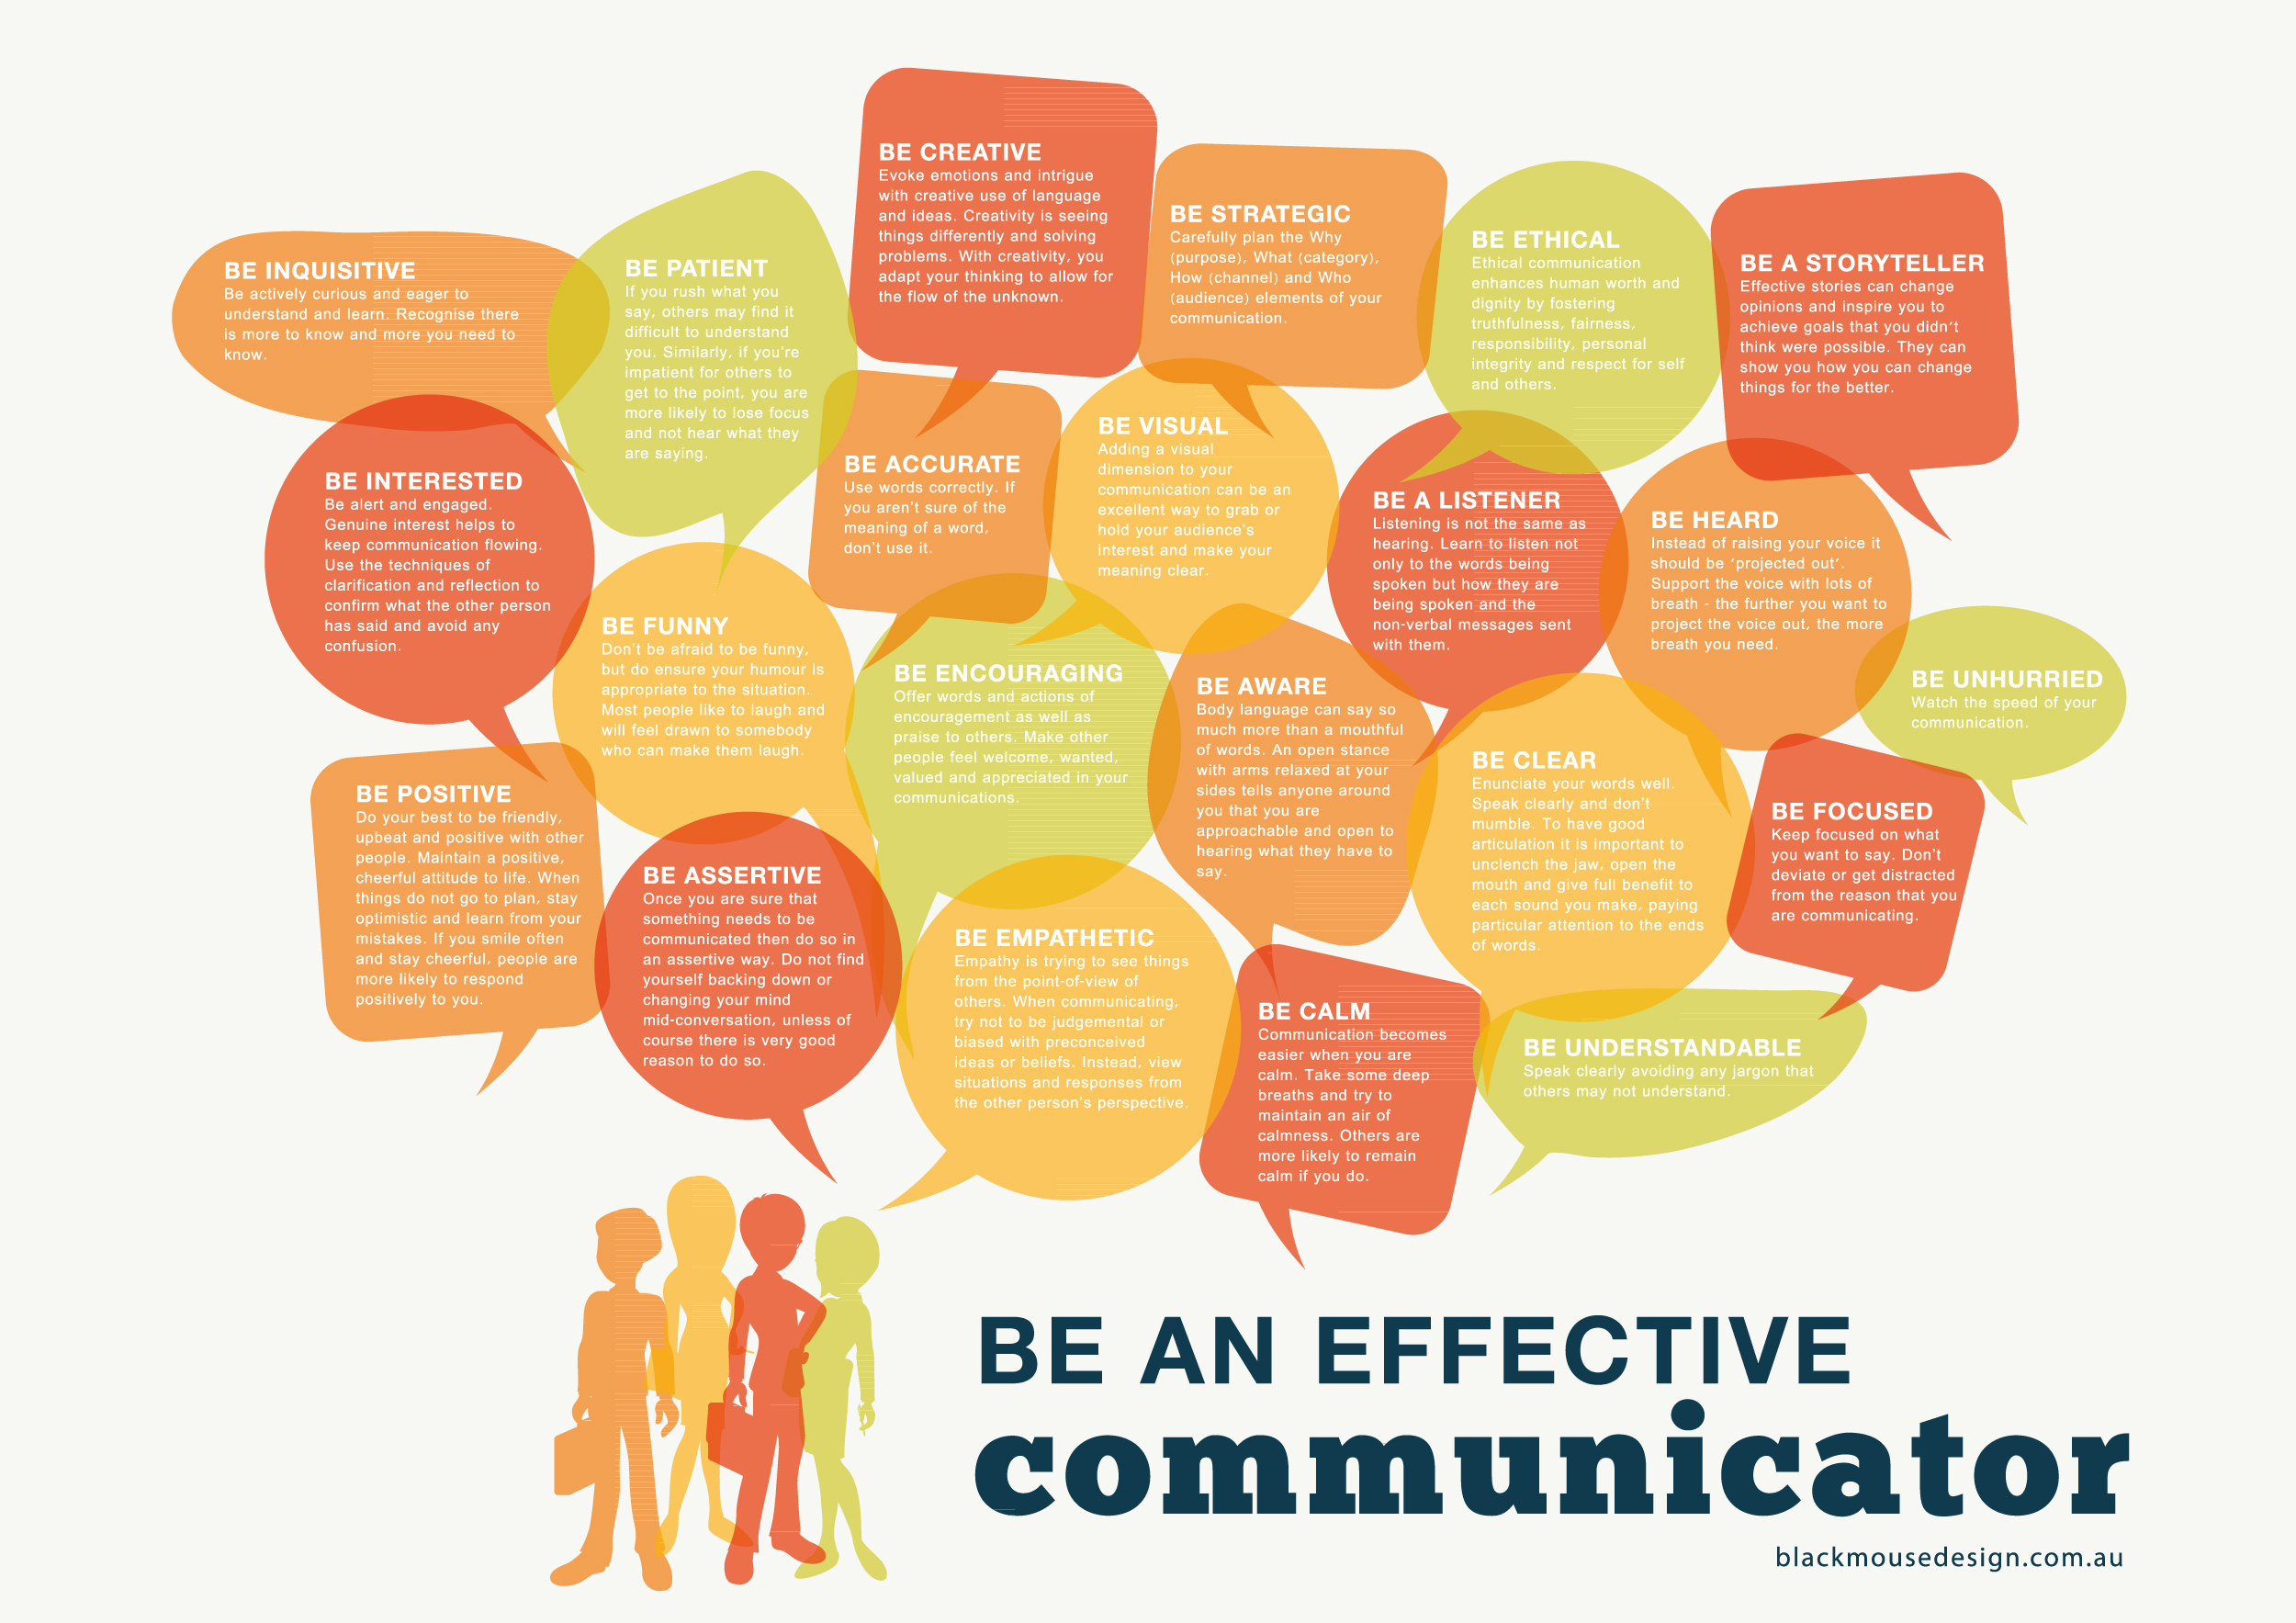 good paraphrasing skills are essential to being an effective communicator